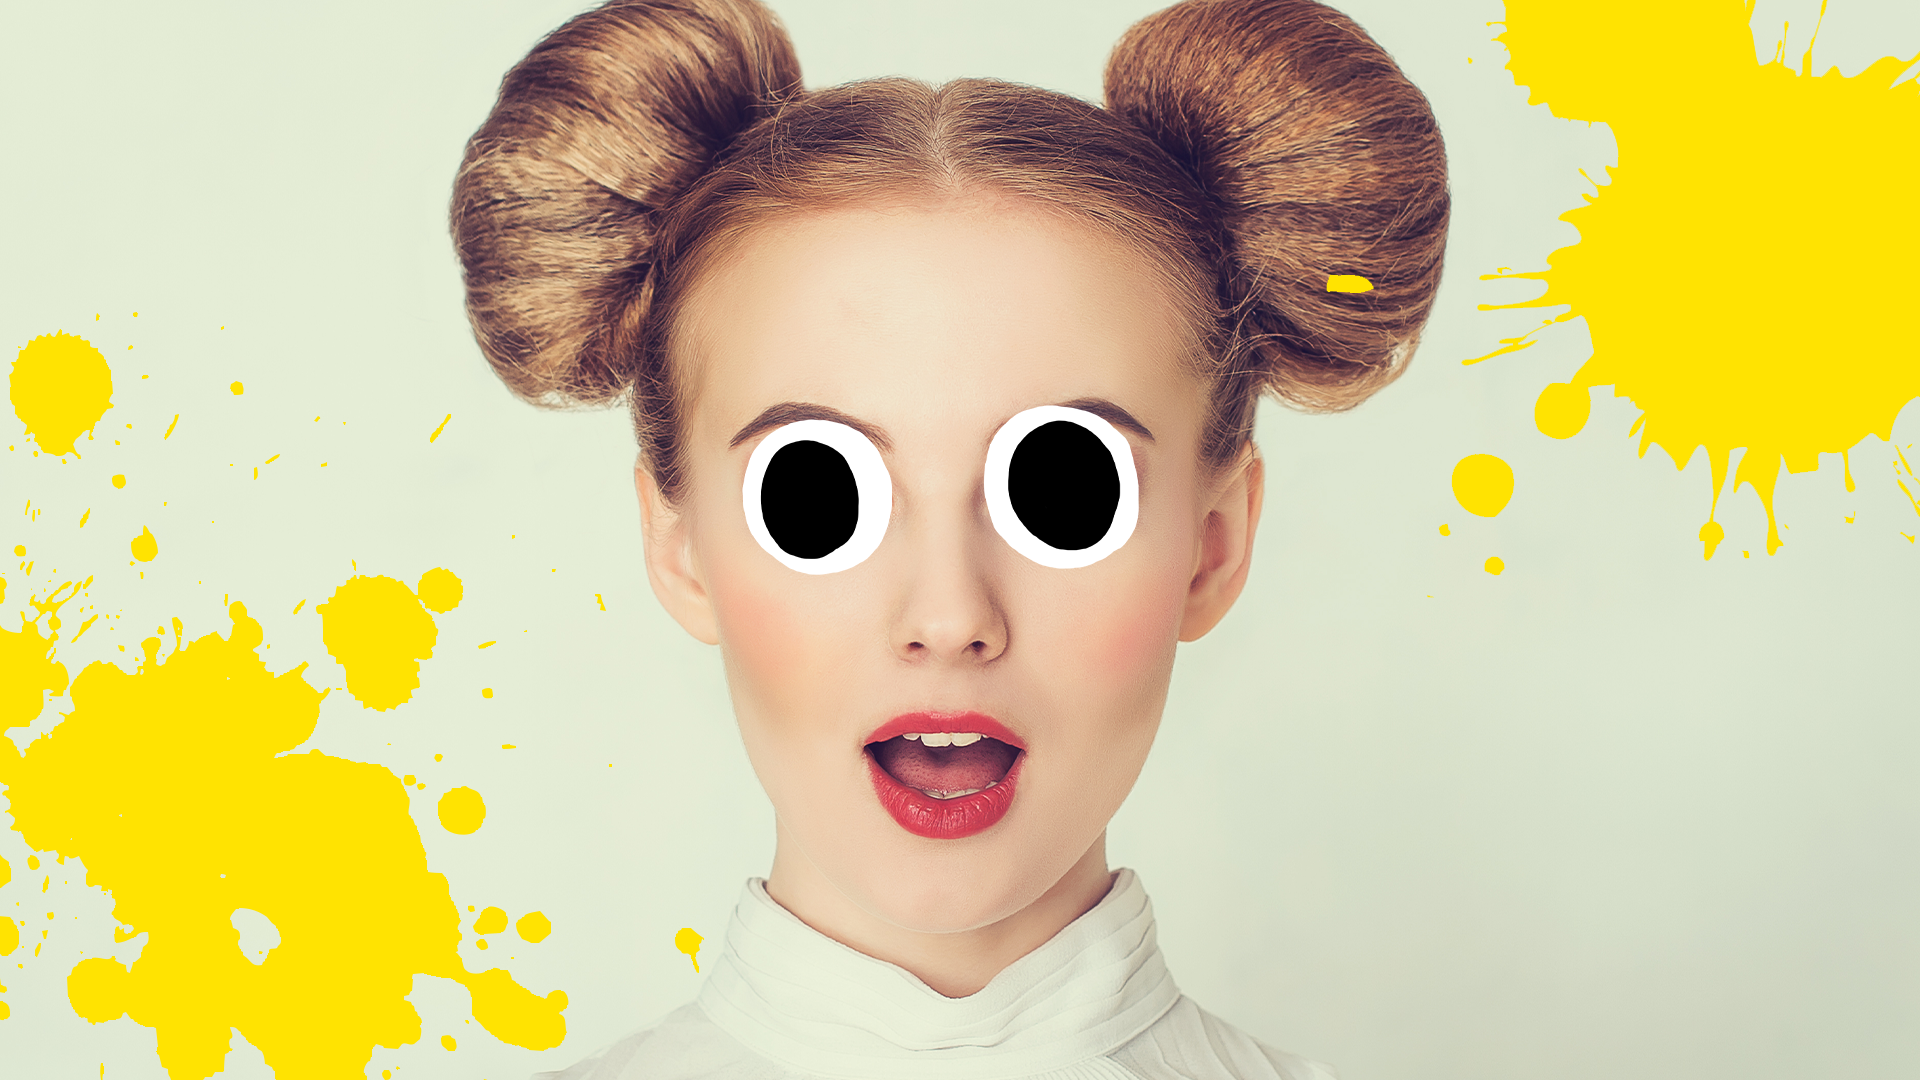 Woman with hair in buns on grey background with yellow splats